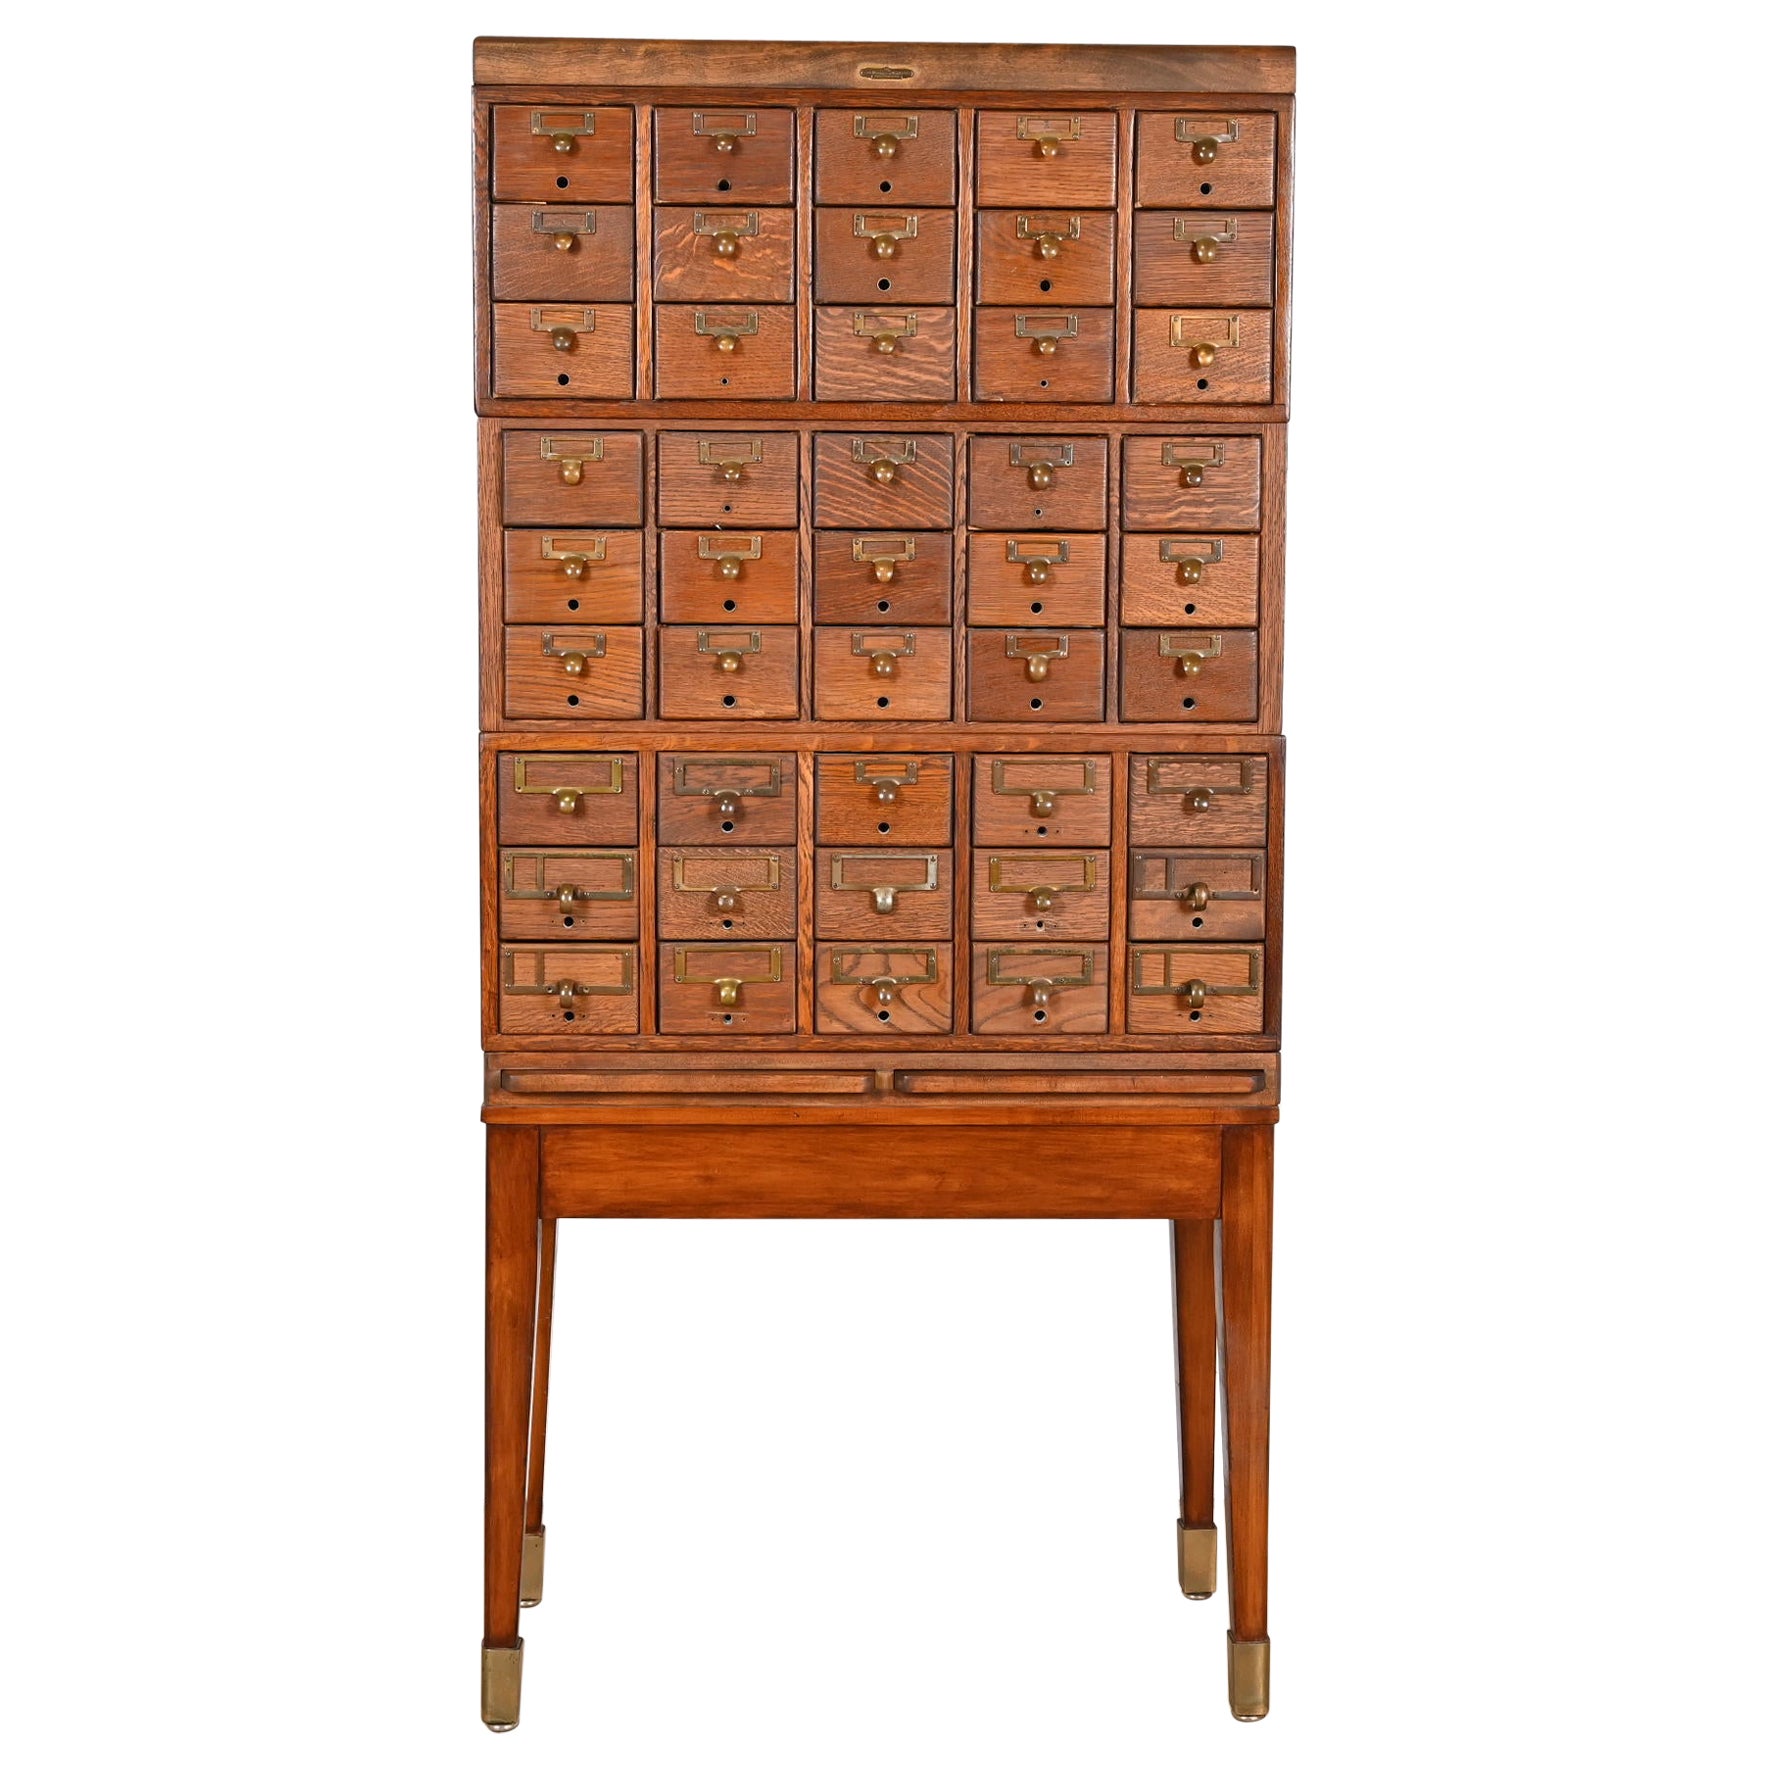 What are the dimensions of a card catalog drawer?